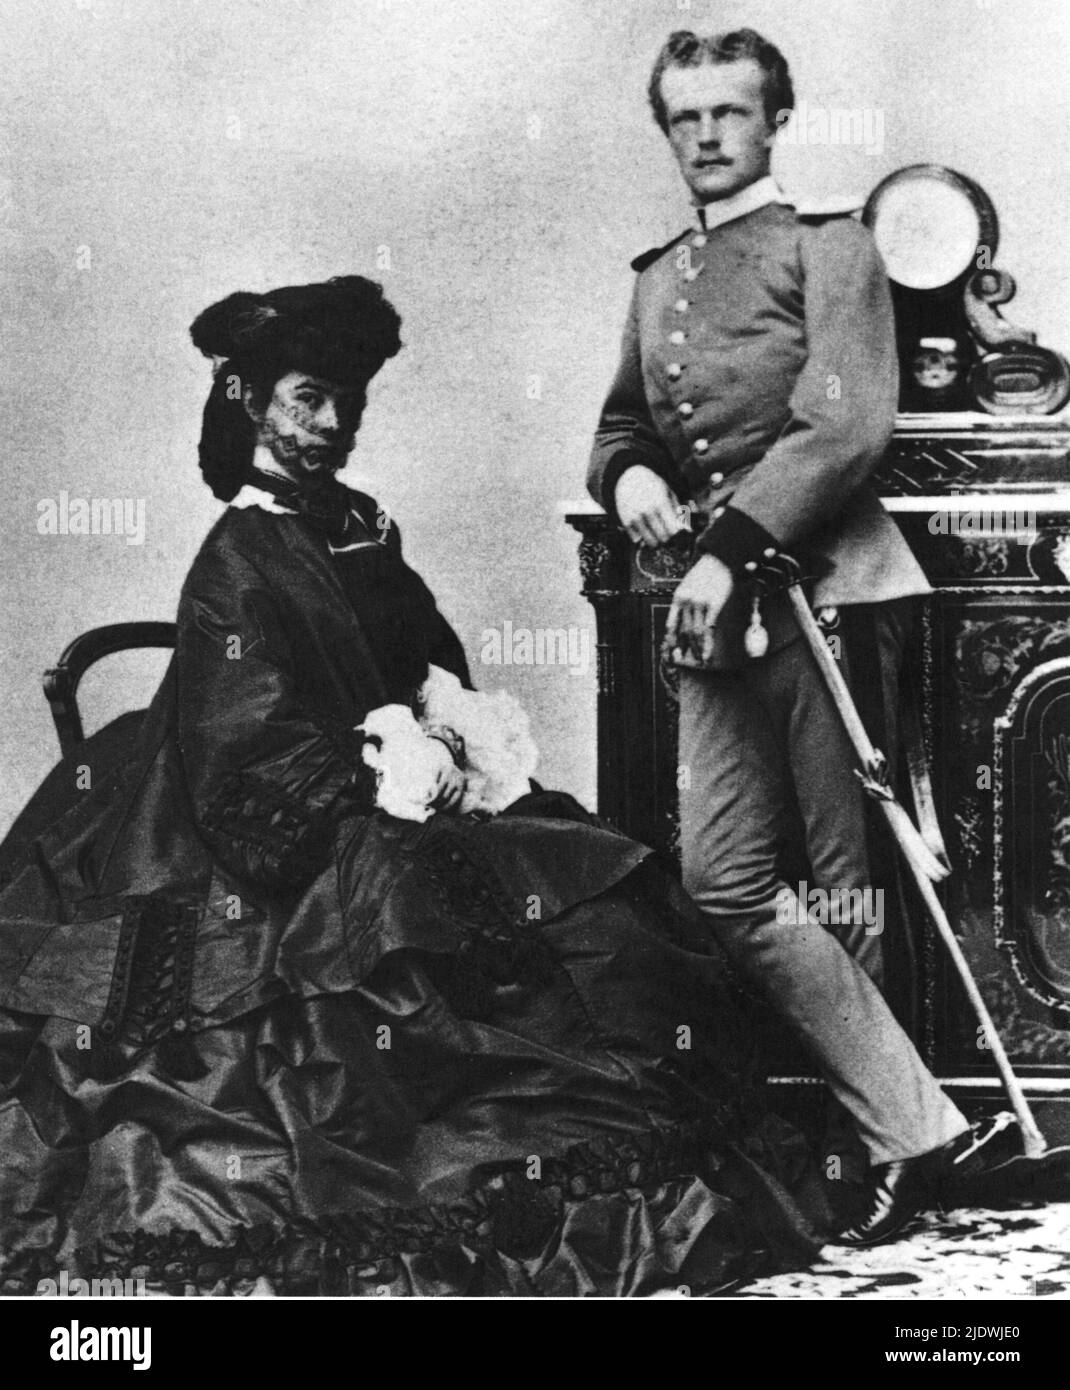 1863 ca.  , Wien , Austria   : The celebrated austrian  Empress Elisabeth of HABSBURG   ( SISSI von Wittelsbach  , 1937 - 1898 ) with his brother prince CARL THEODOR of Bayern . aughter of Maximillian von Bayern, wife of  Kaiser Franz Josef ( 1830 - 1916 ) , Emperor of Austria , King of Hungary and Bohemia . Mother of suicided prince Rudolf ( 1850 - 1889 ). The Empress was killed by the italian anarchist Luigi Luccheni in Geneva  - FRANCESCO GIUSEPPE - JOSEPH - ABSBURG - ASBURG - ASBURGO - NOBILITY - NOBILI - NOBILTA' - REALI  - HASBURG - ROYALTY - ELISABETTA DI BAVIERA  - triste - sad - trist Stock Photo